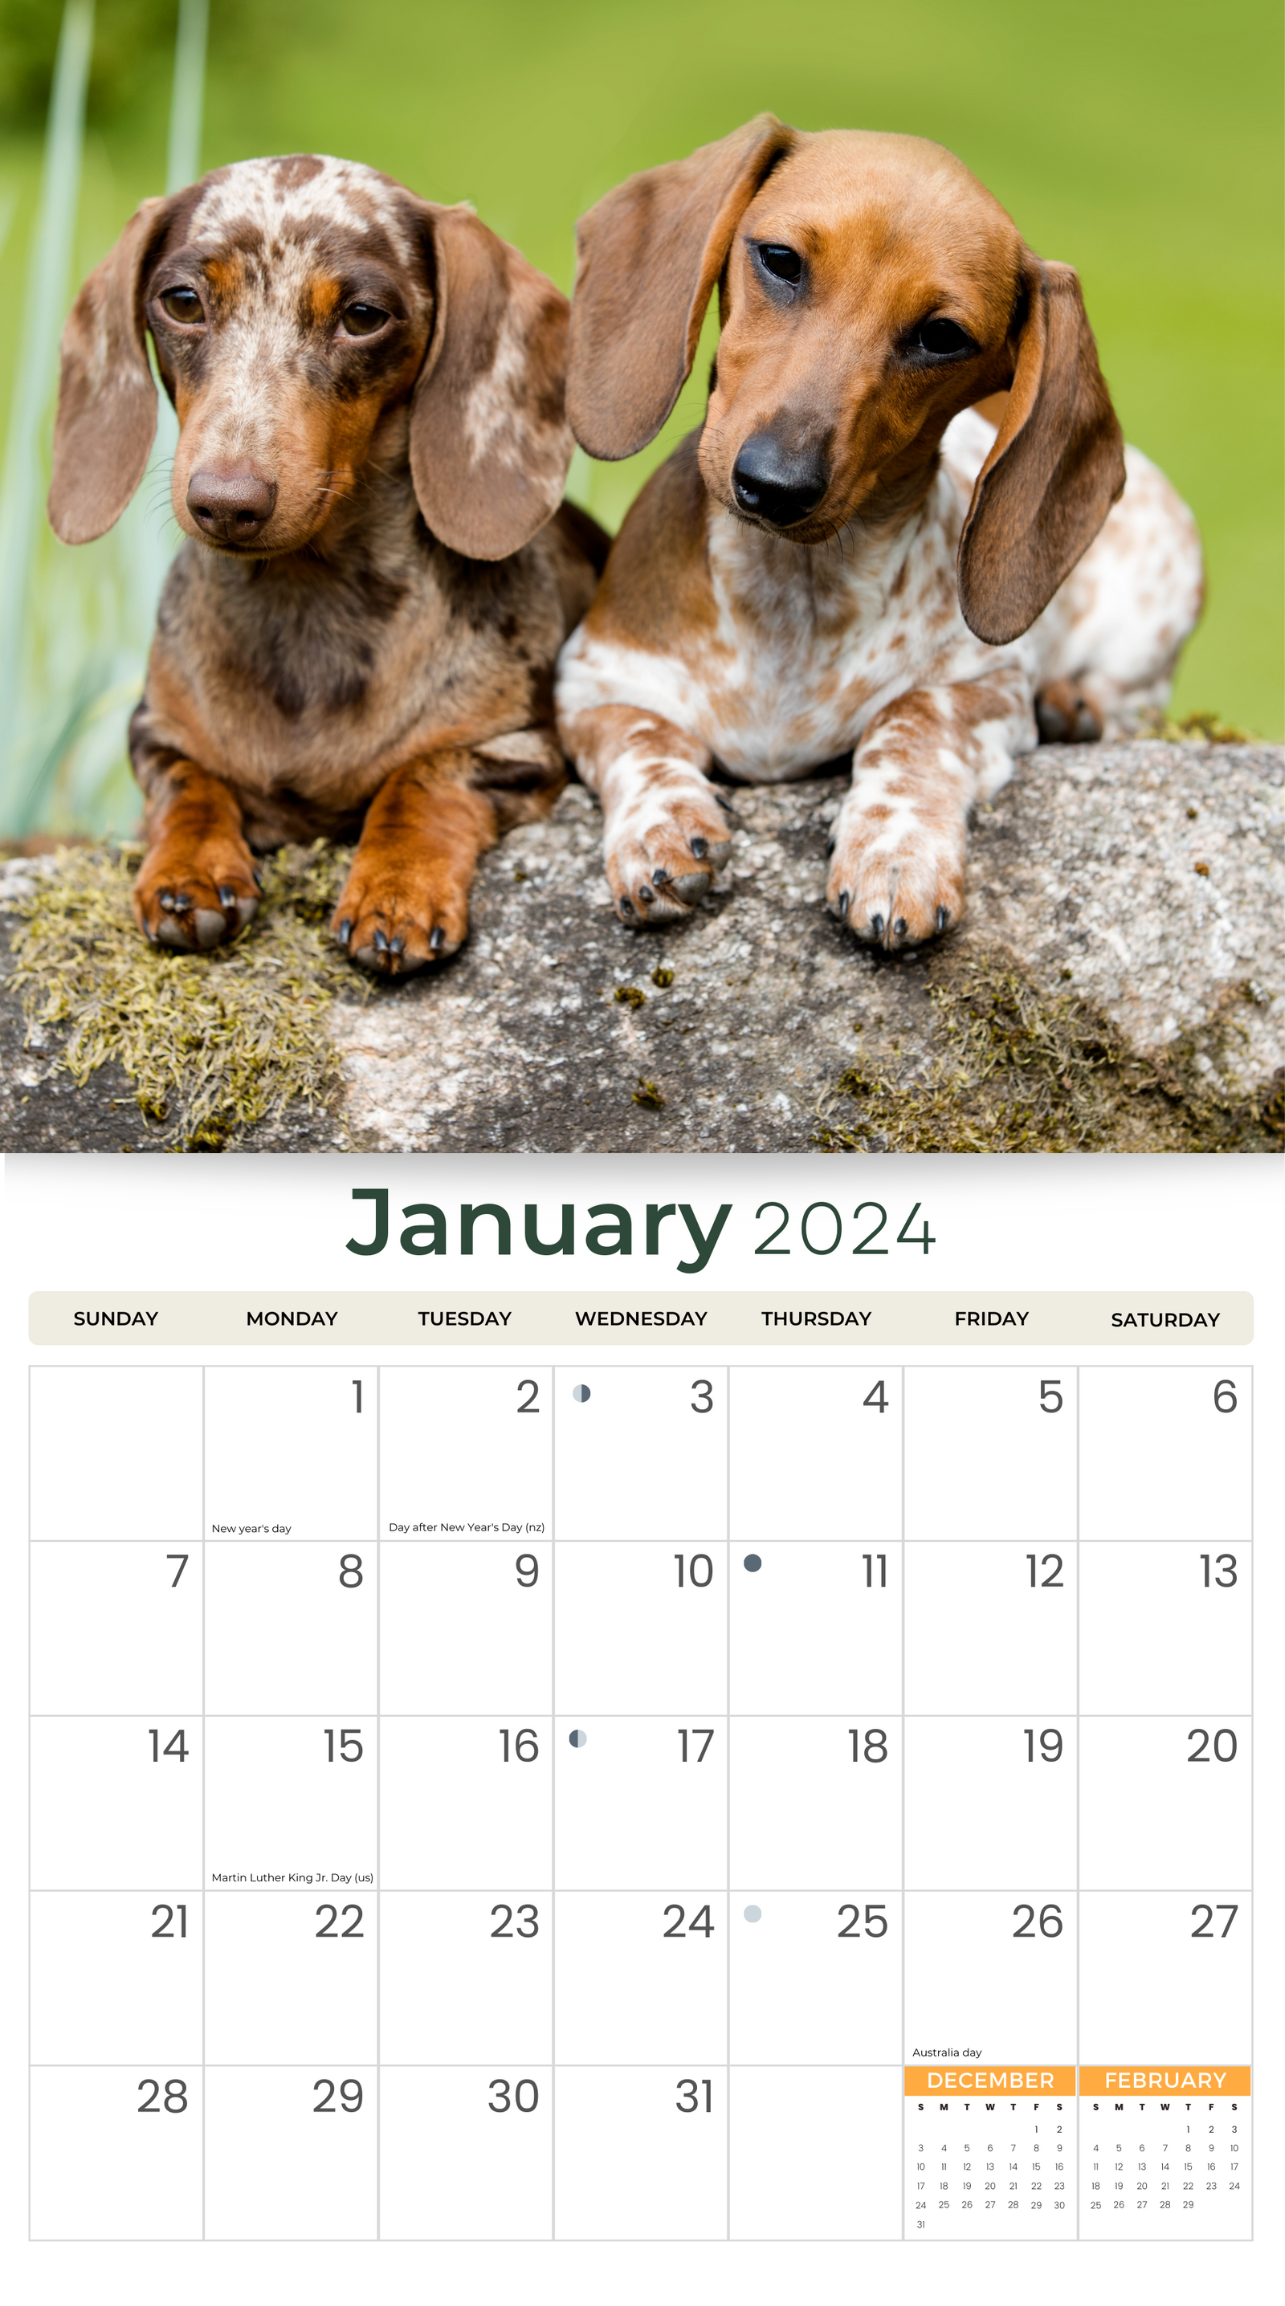 2024 Dachshunds Dogs & Puppies - Deluxe Wall Calendar by Just Calendars - 16 Month - Plastic Free